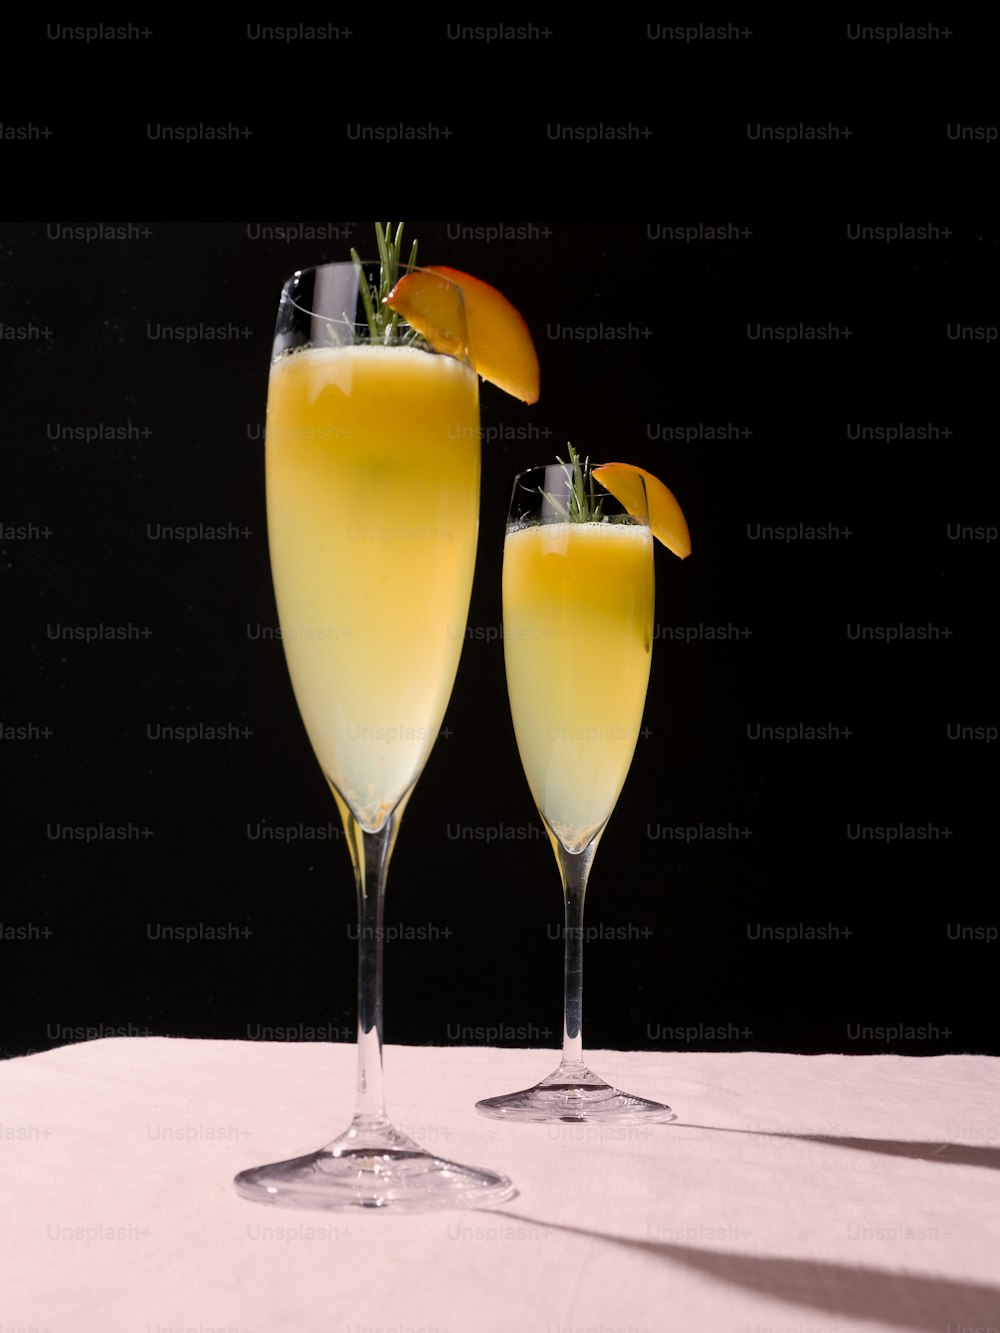 Bellini, a cocktail with Prosecco or champagne, white peaches and sugar syrup, in a pop contemporary style. Dark background.